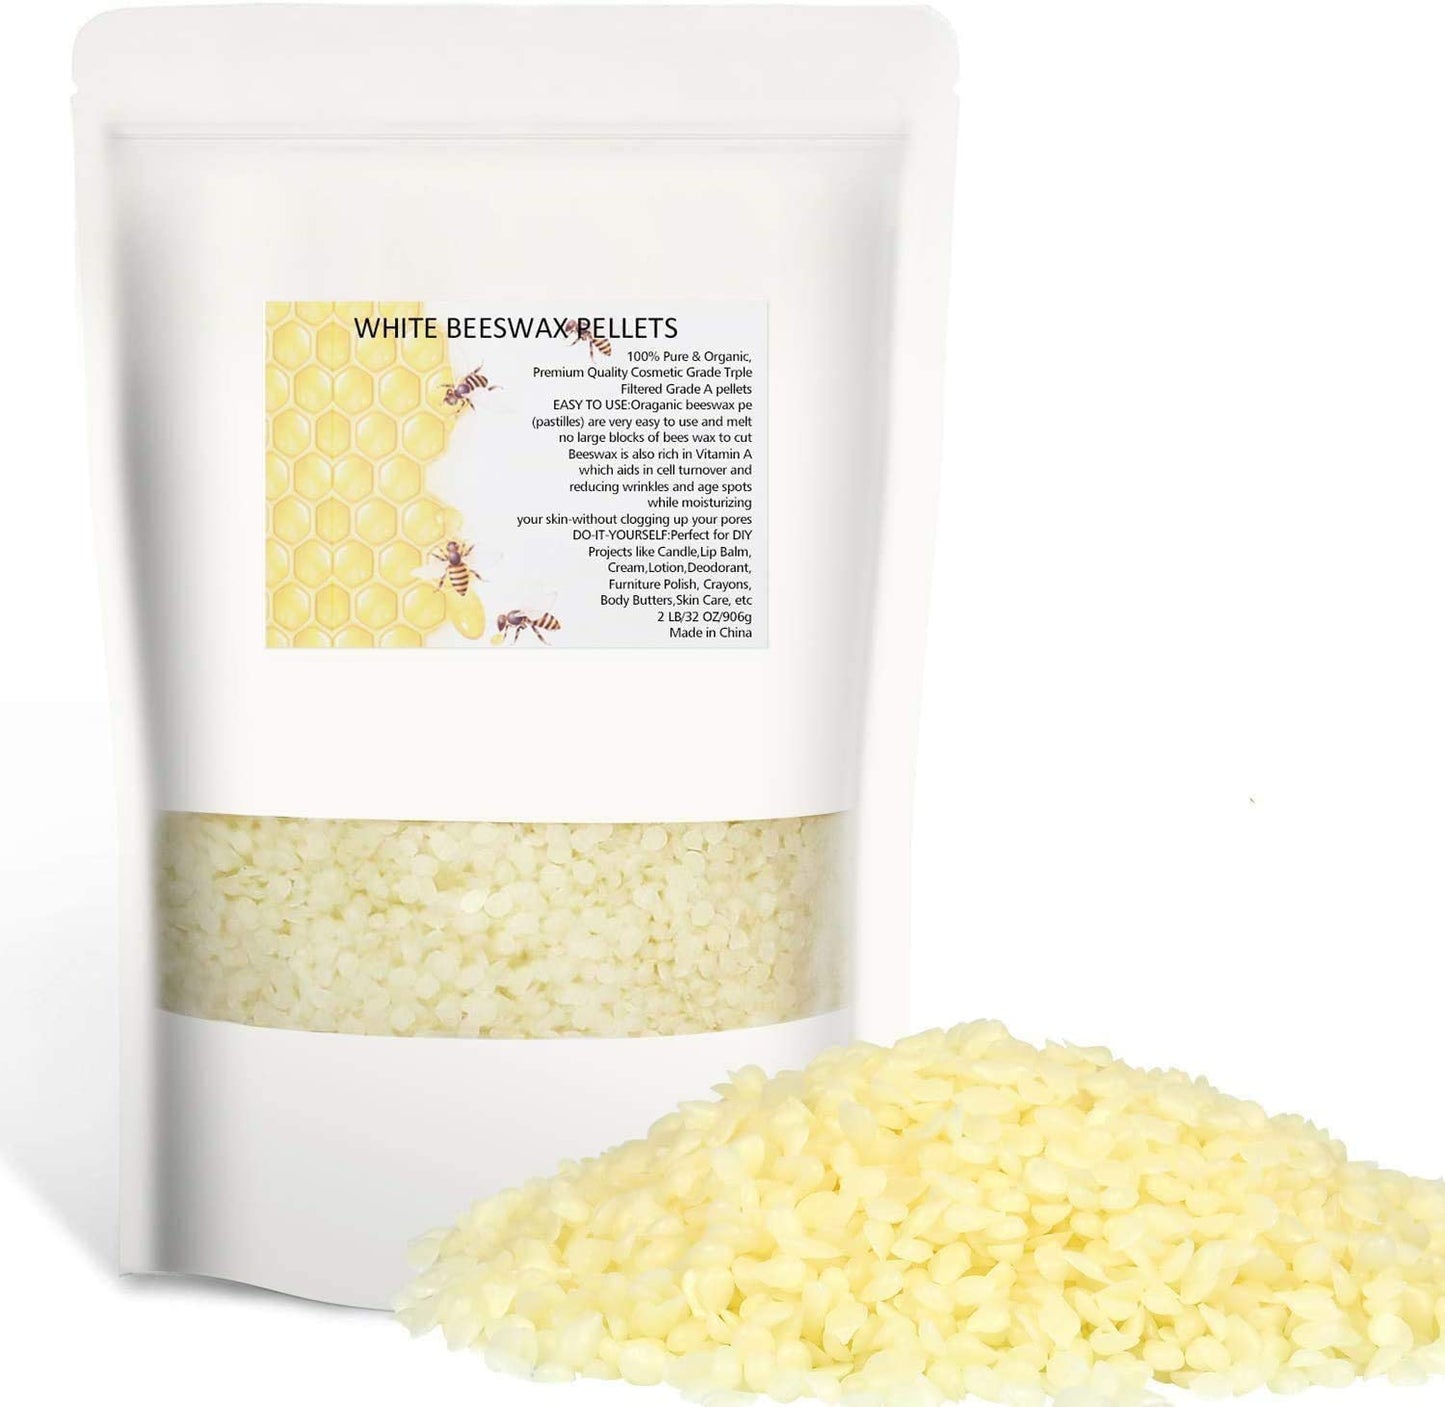 White Beeswax Pellets 2LB 100% Pure and Natural Triple Filtered for Skin, Face, Body and Hair Care DIY Creams, Lotions, Lip Balm and Soap Making Supplies